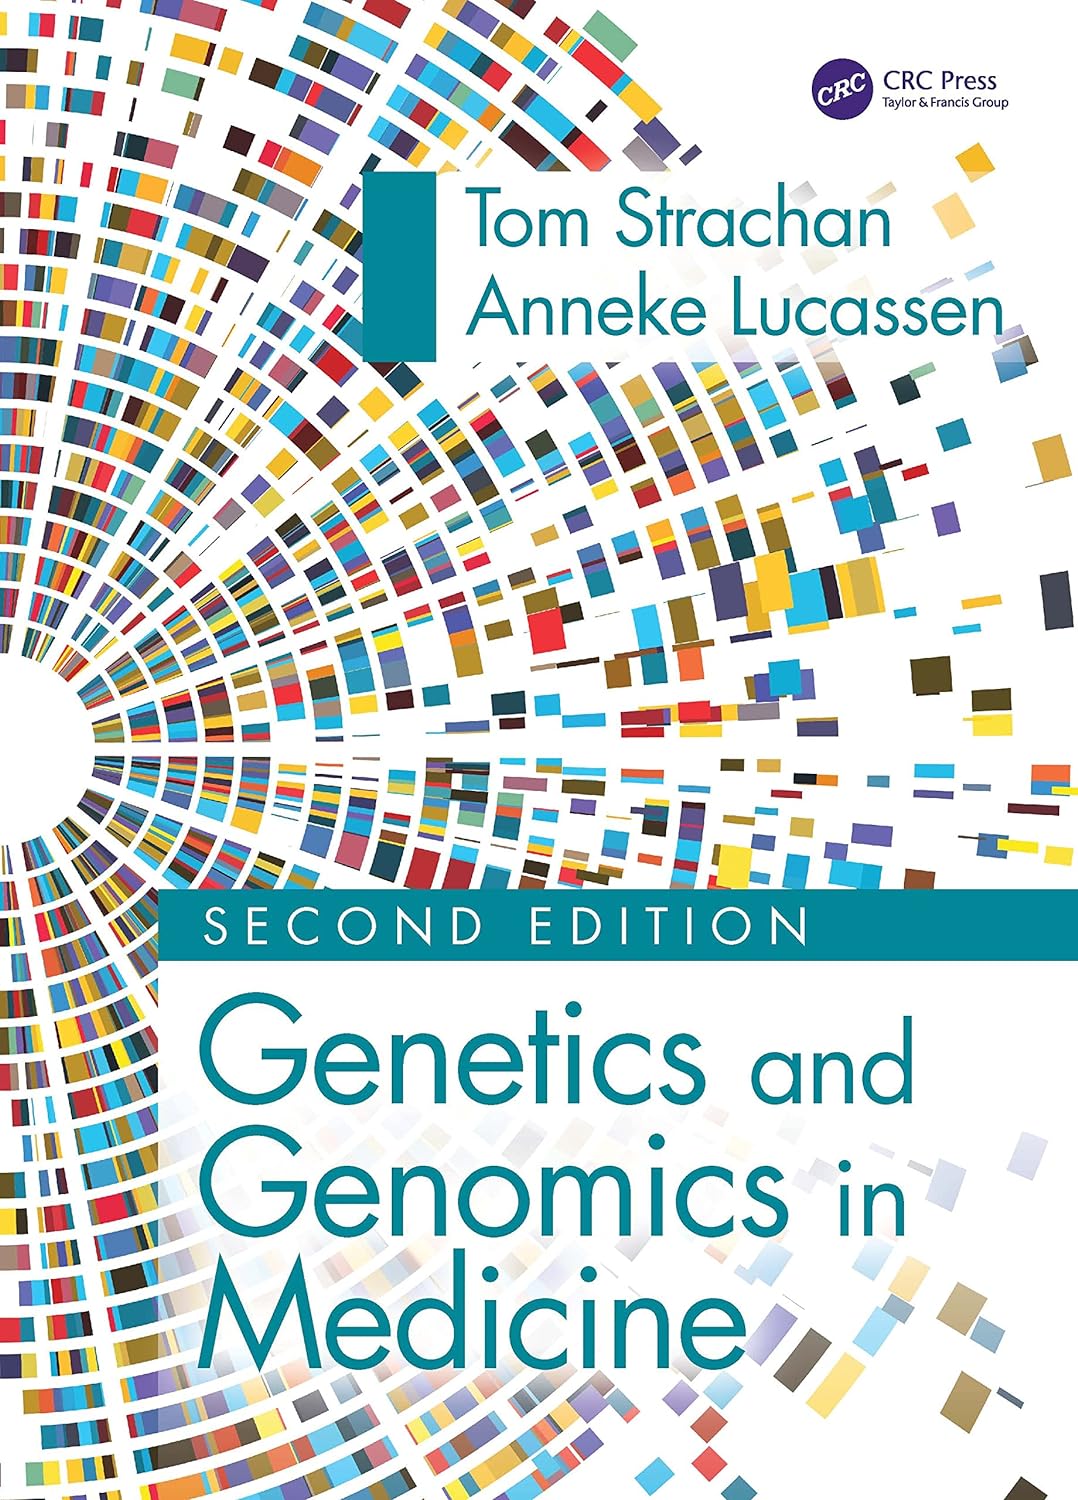 Genetics and Genomics in Medicine, 2nd Edition by Tom Strachan 